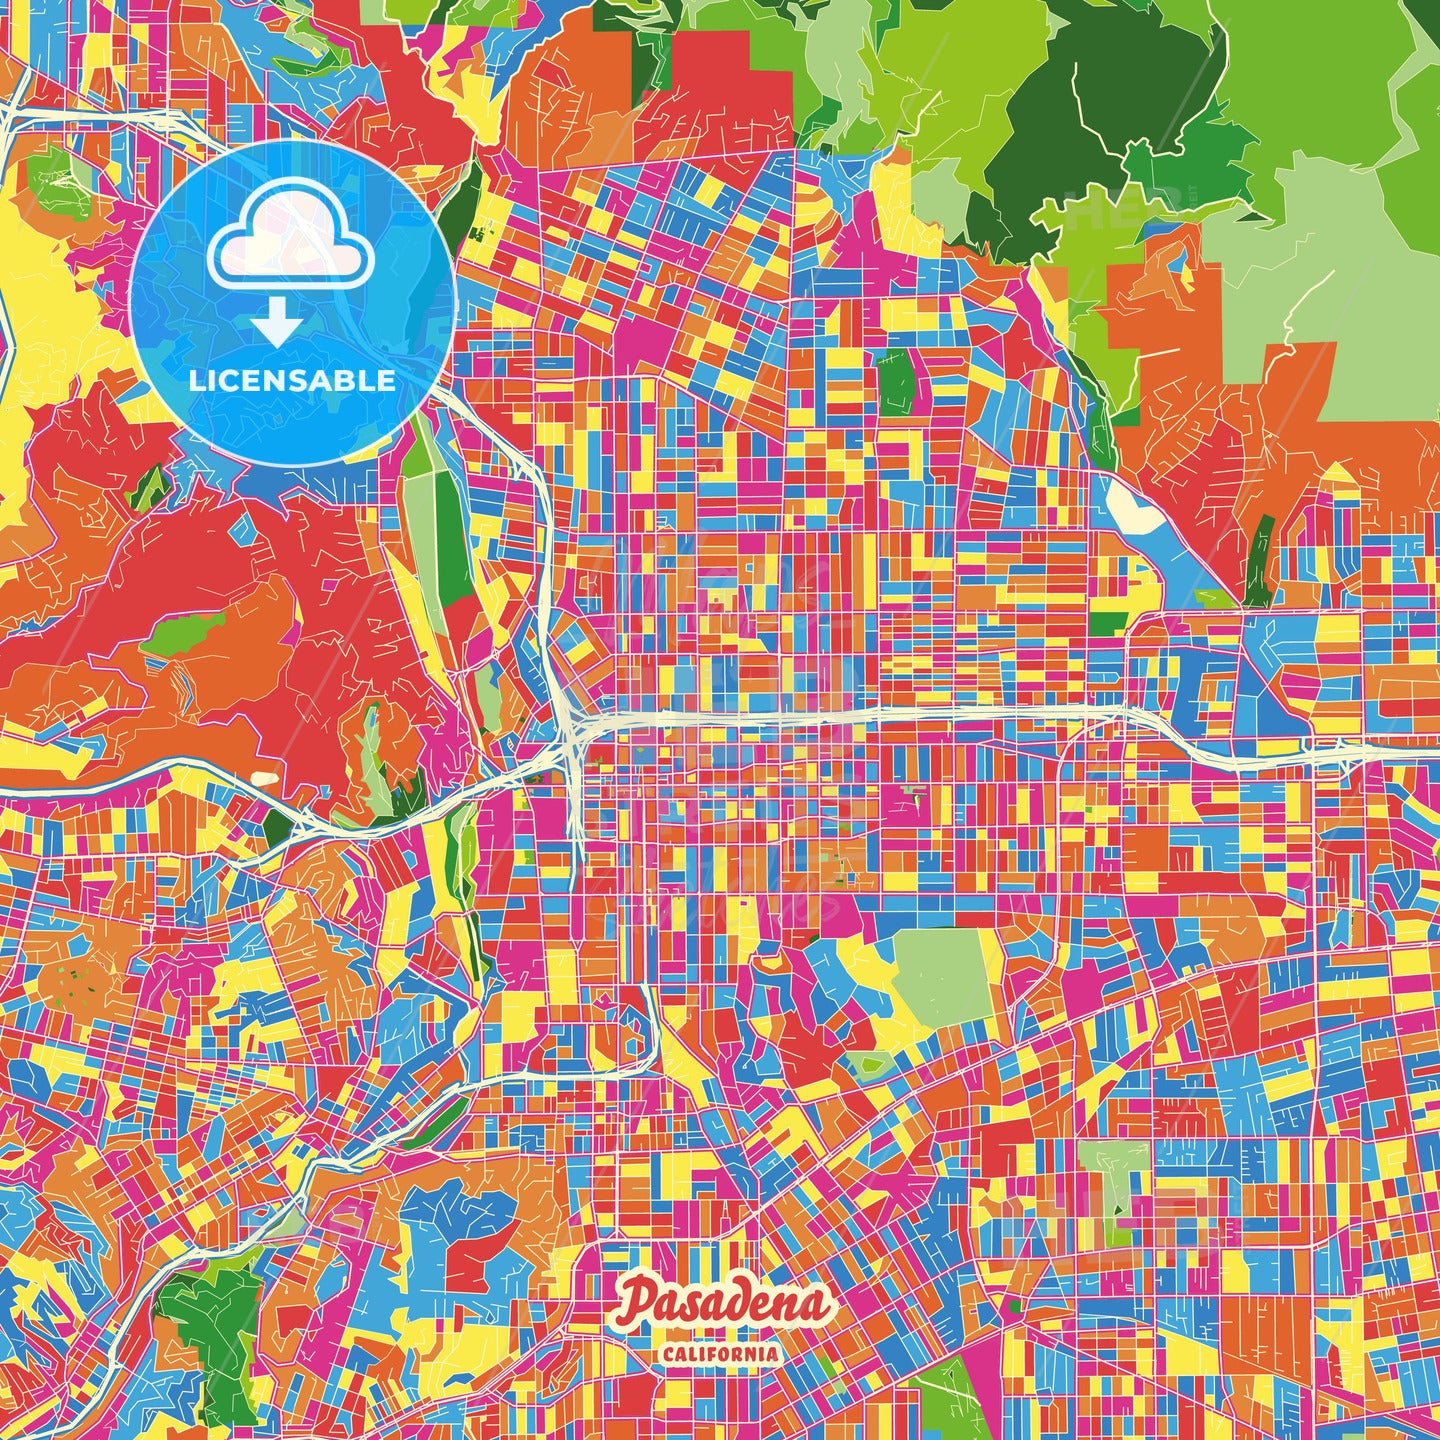 Pasadena, United States Crazy Colorful Street Map Poster Template - HEBSTREITS Sketches